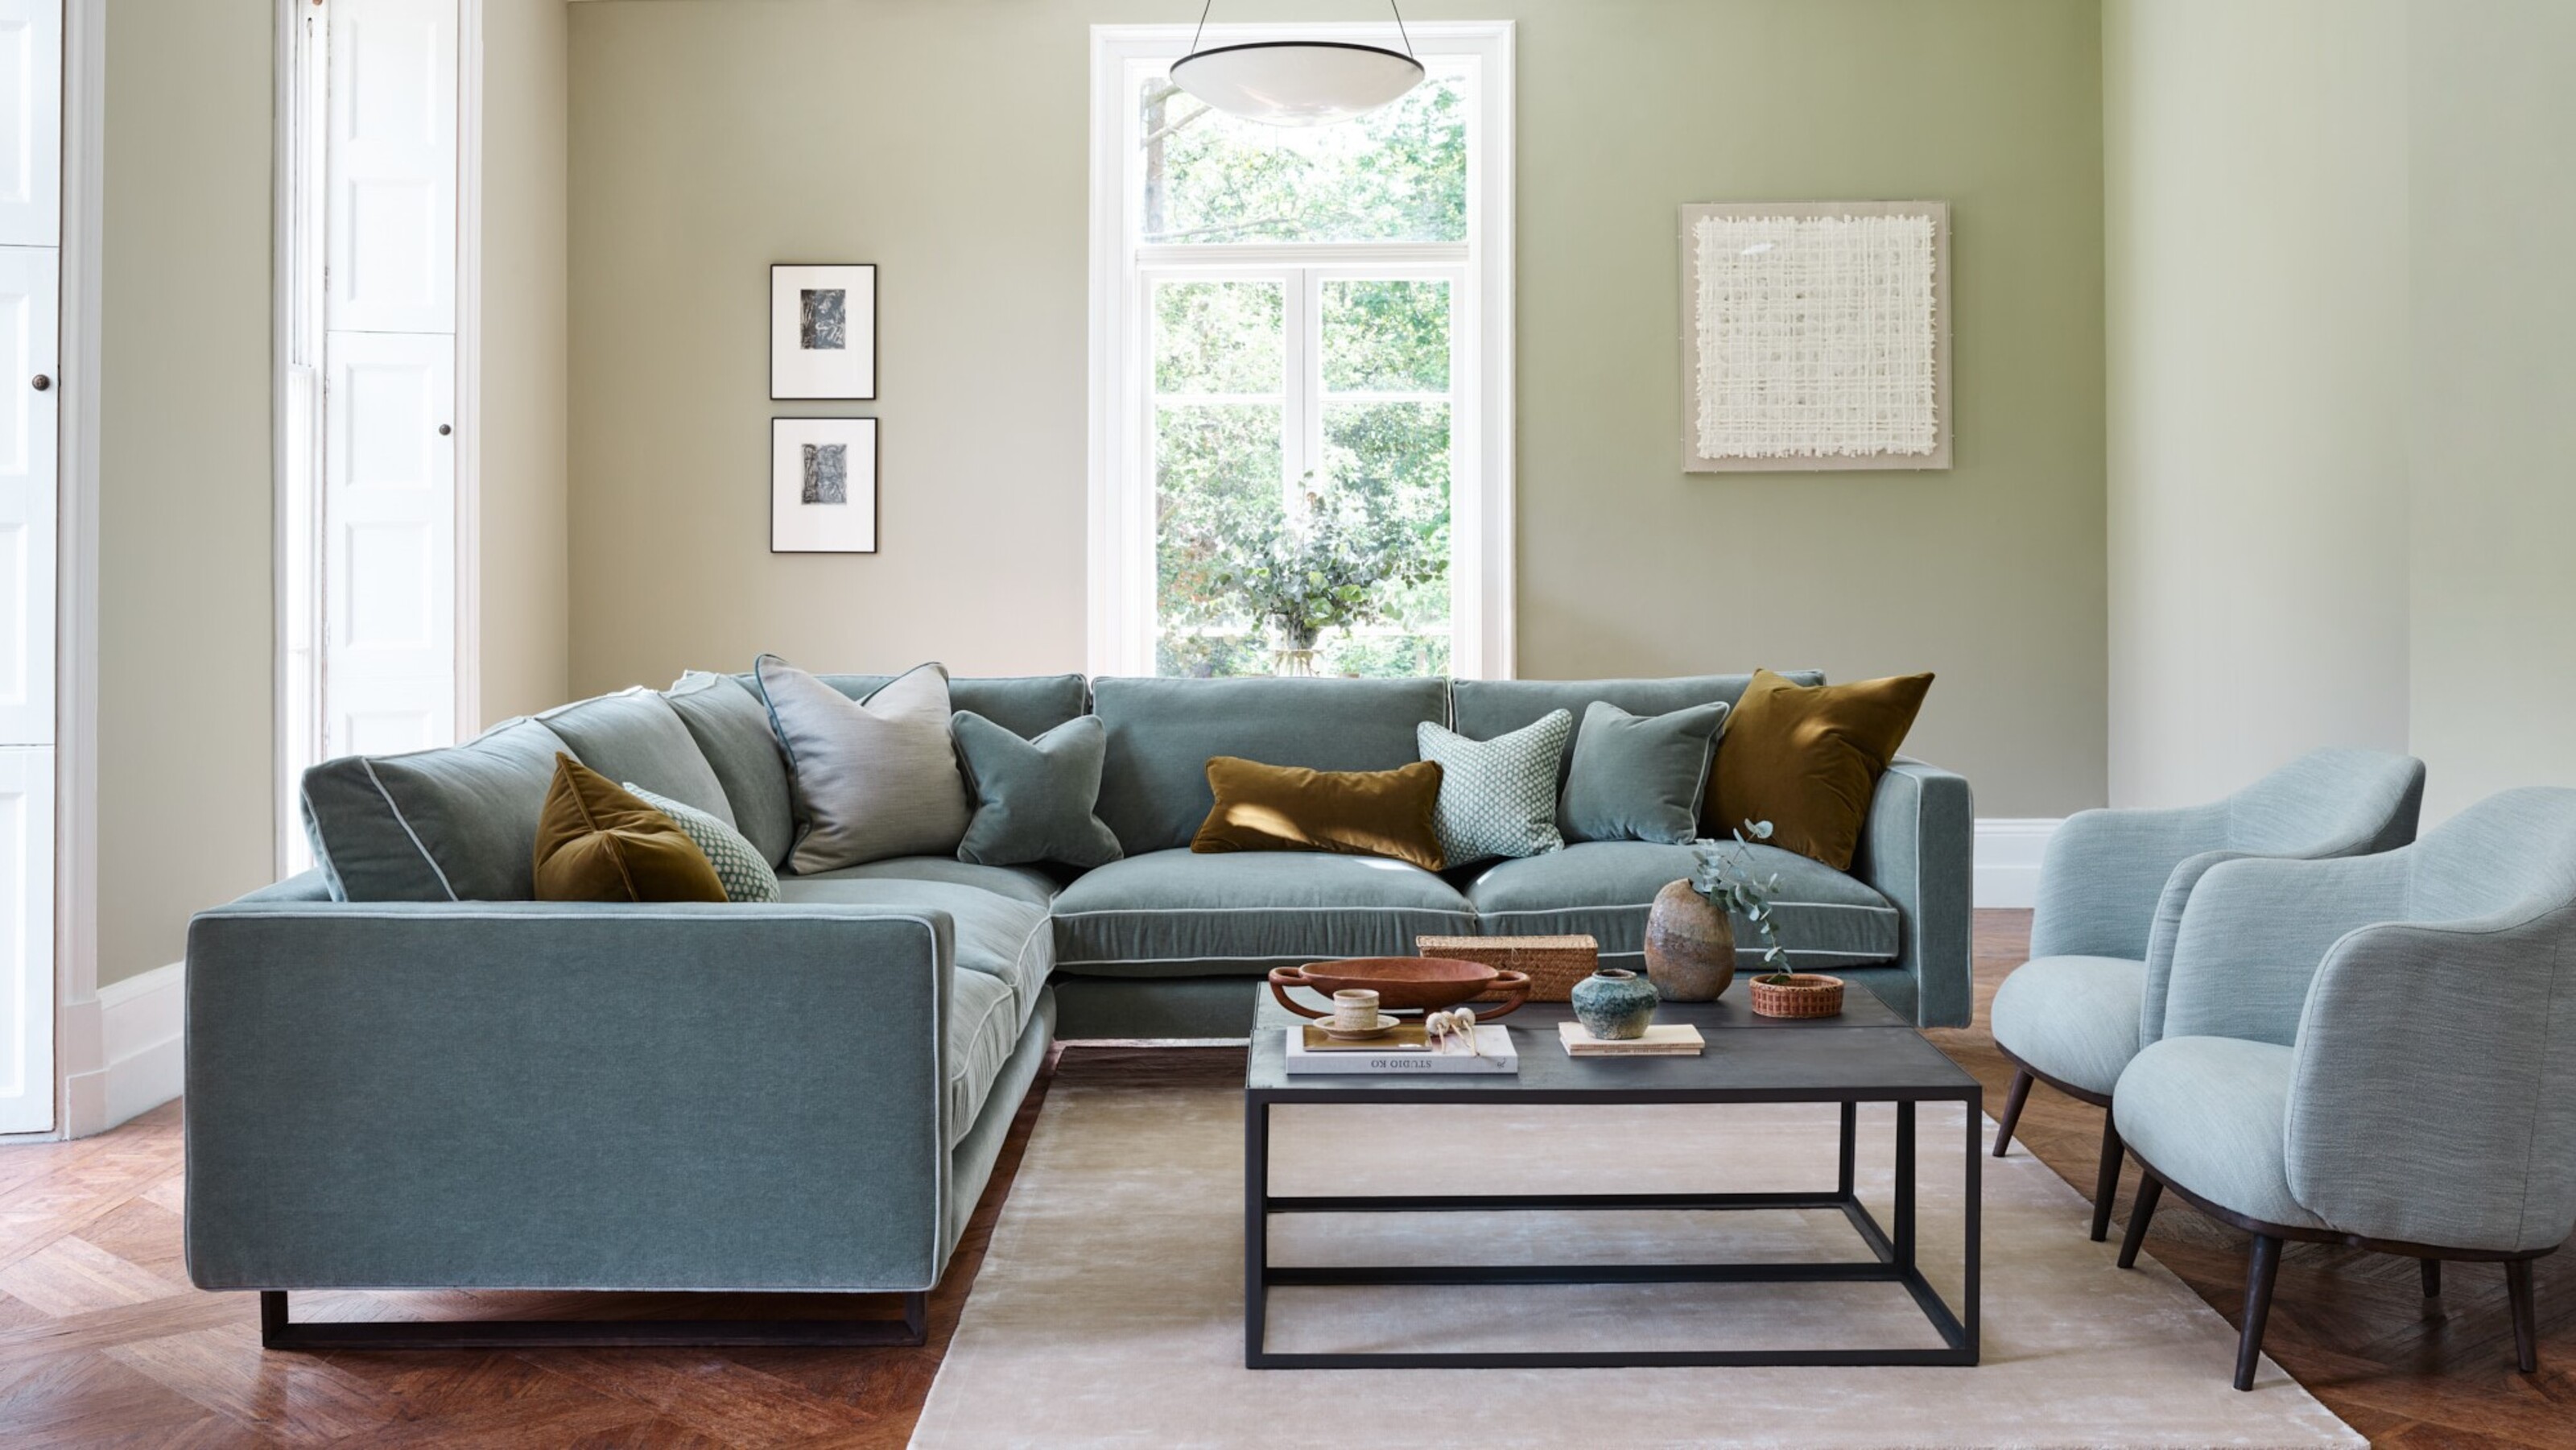 meel zuur Doelwit Is it okay to put a sofa in front of a window? | Livingetc